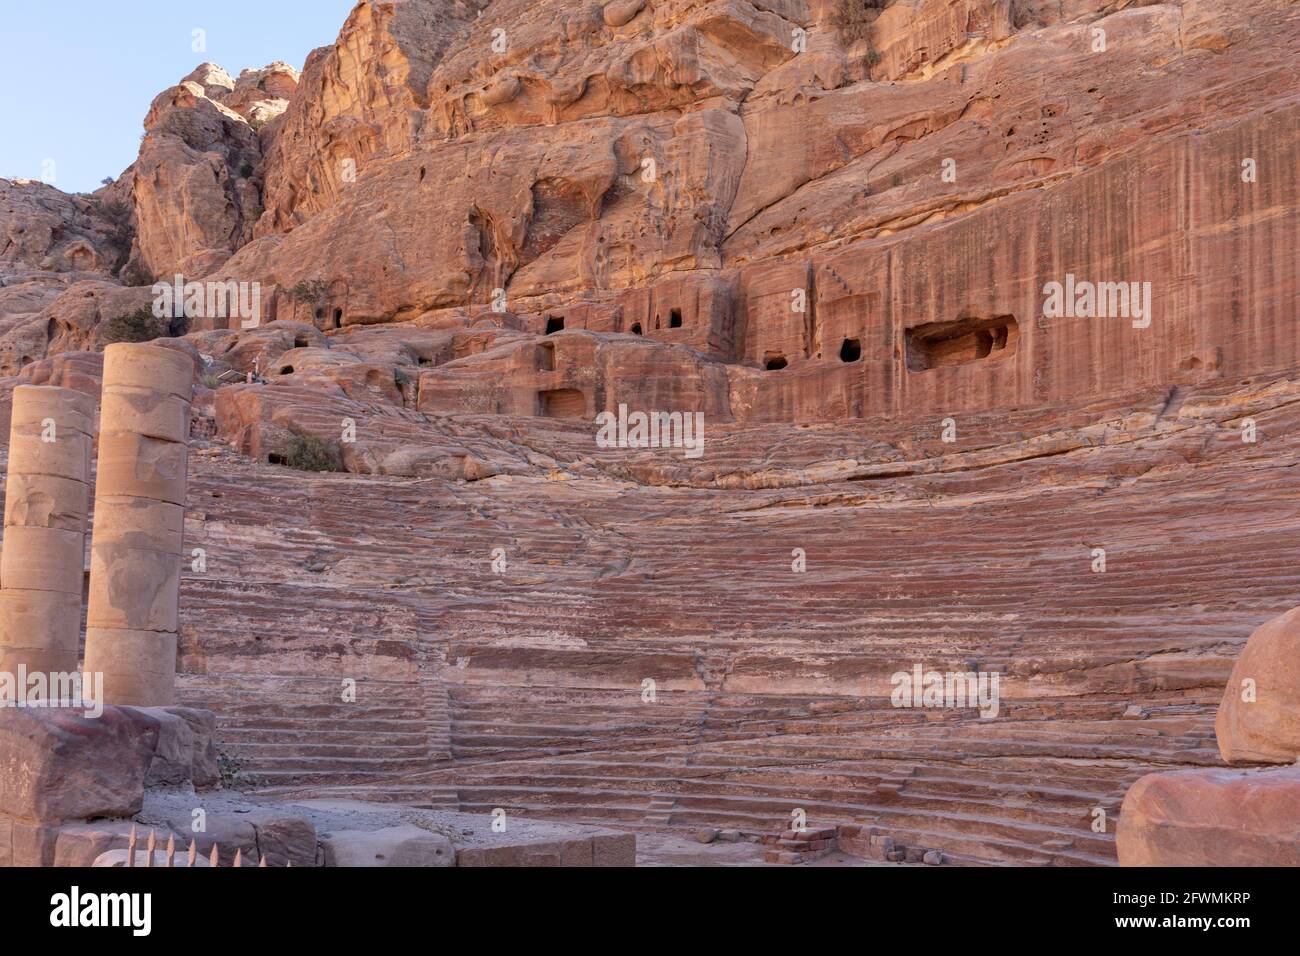 Ruins of the Petra Theatre carved and built at the foot of sand-stone rock formations by Nabataeans in the 1st century in the ancient city of Petra, J Stock Photo